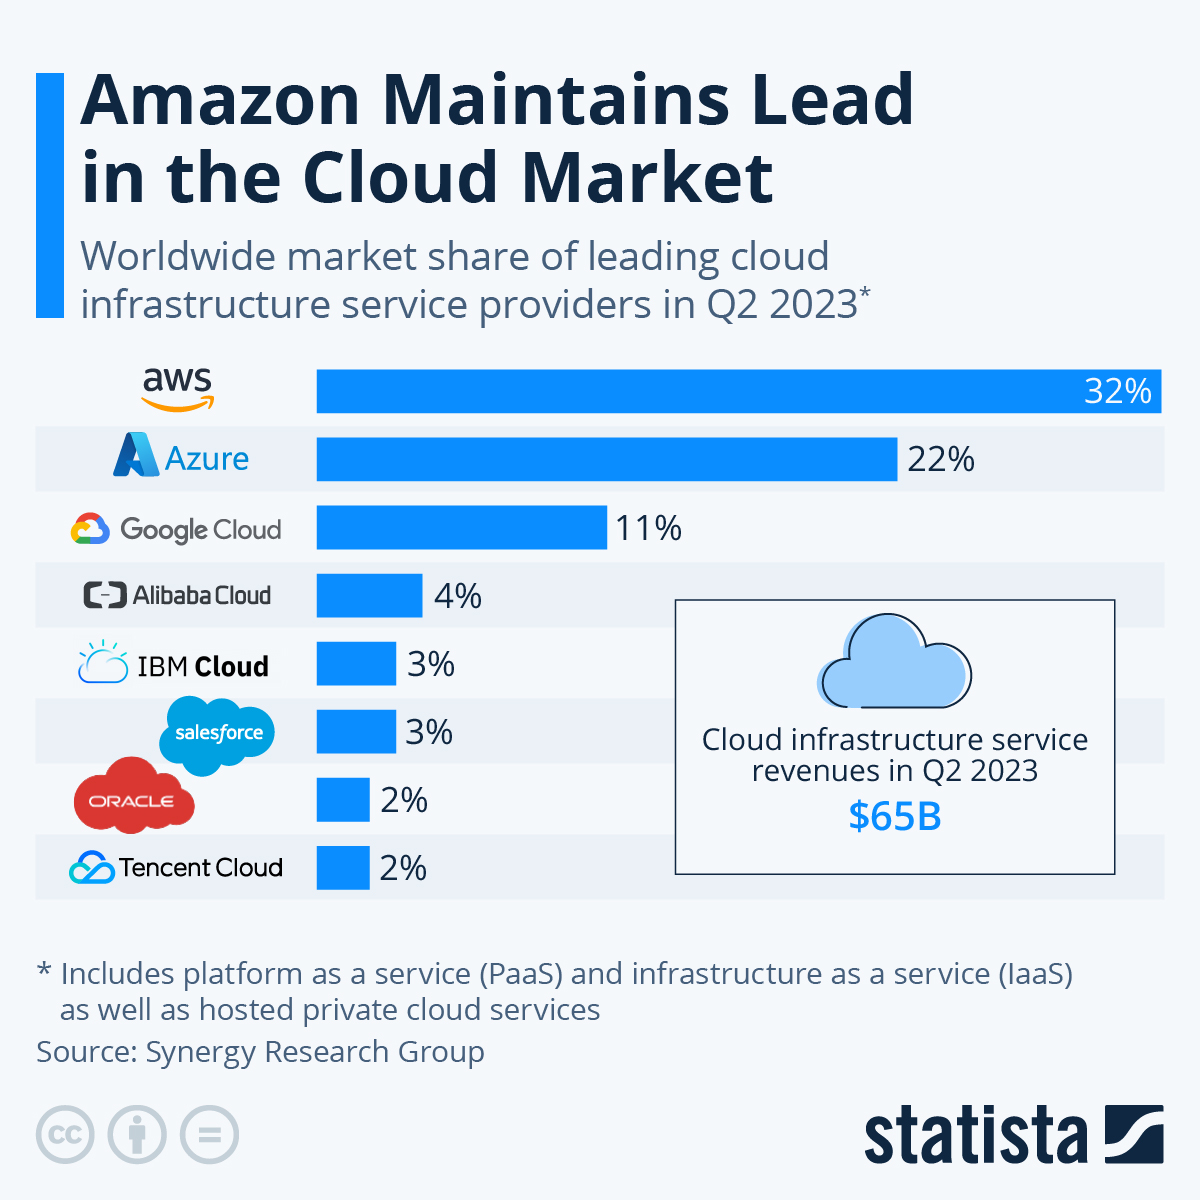 Some leading IaaS providers in the market 